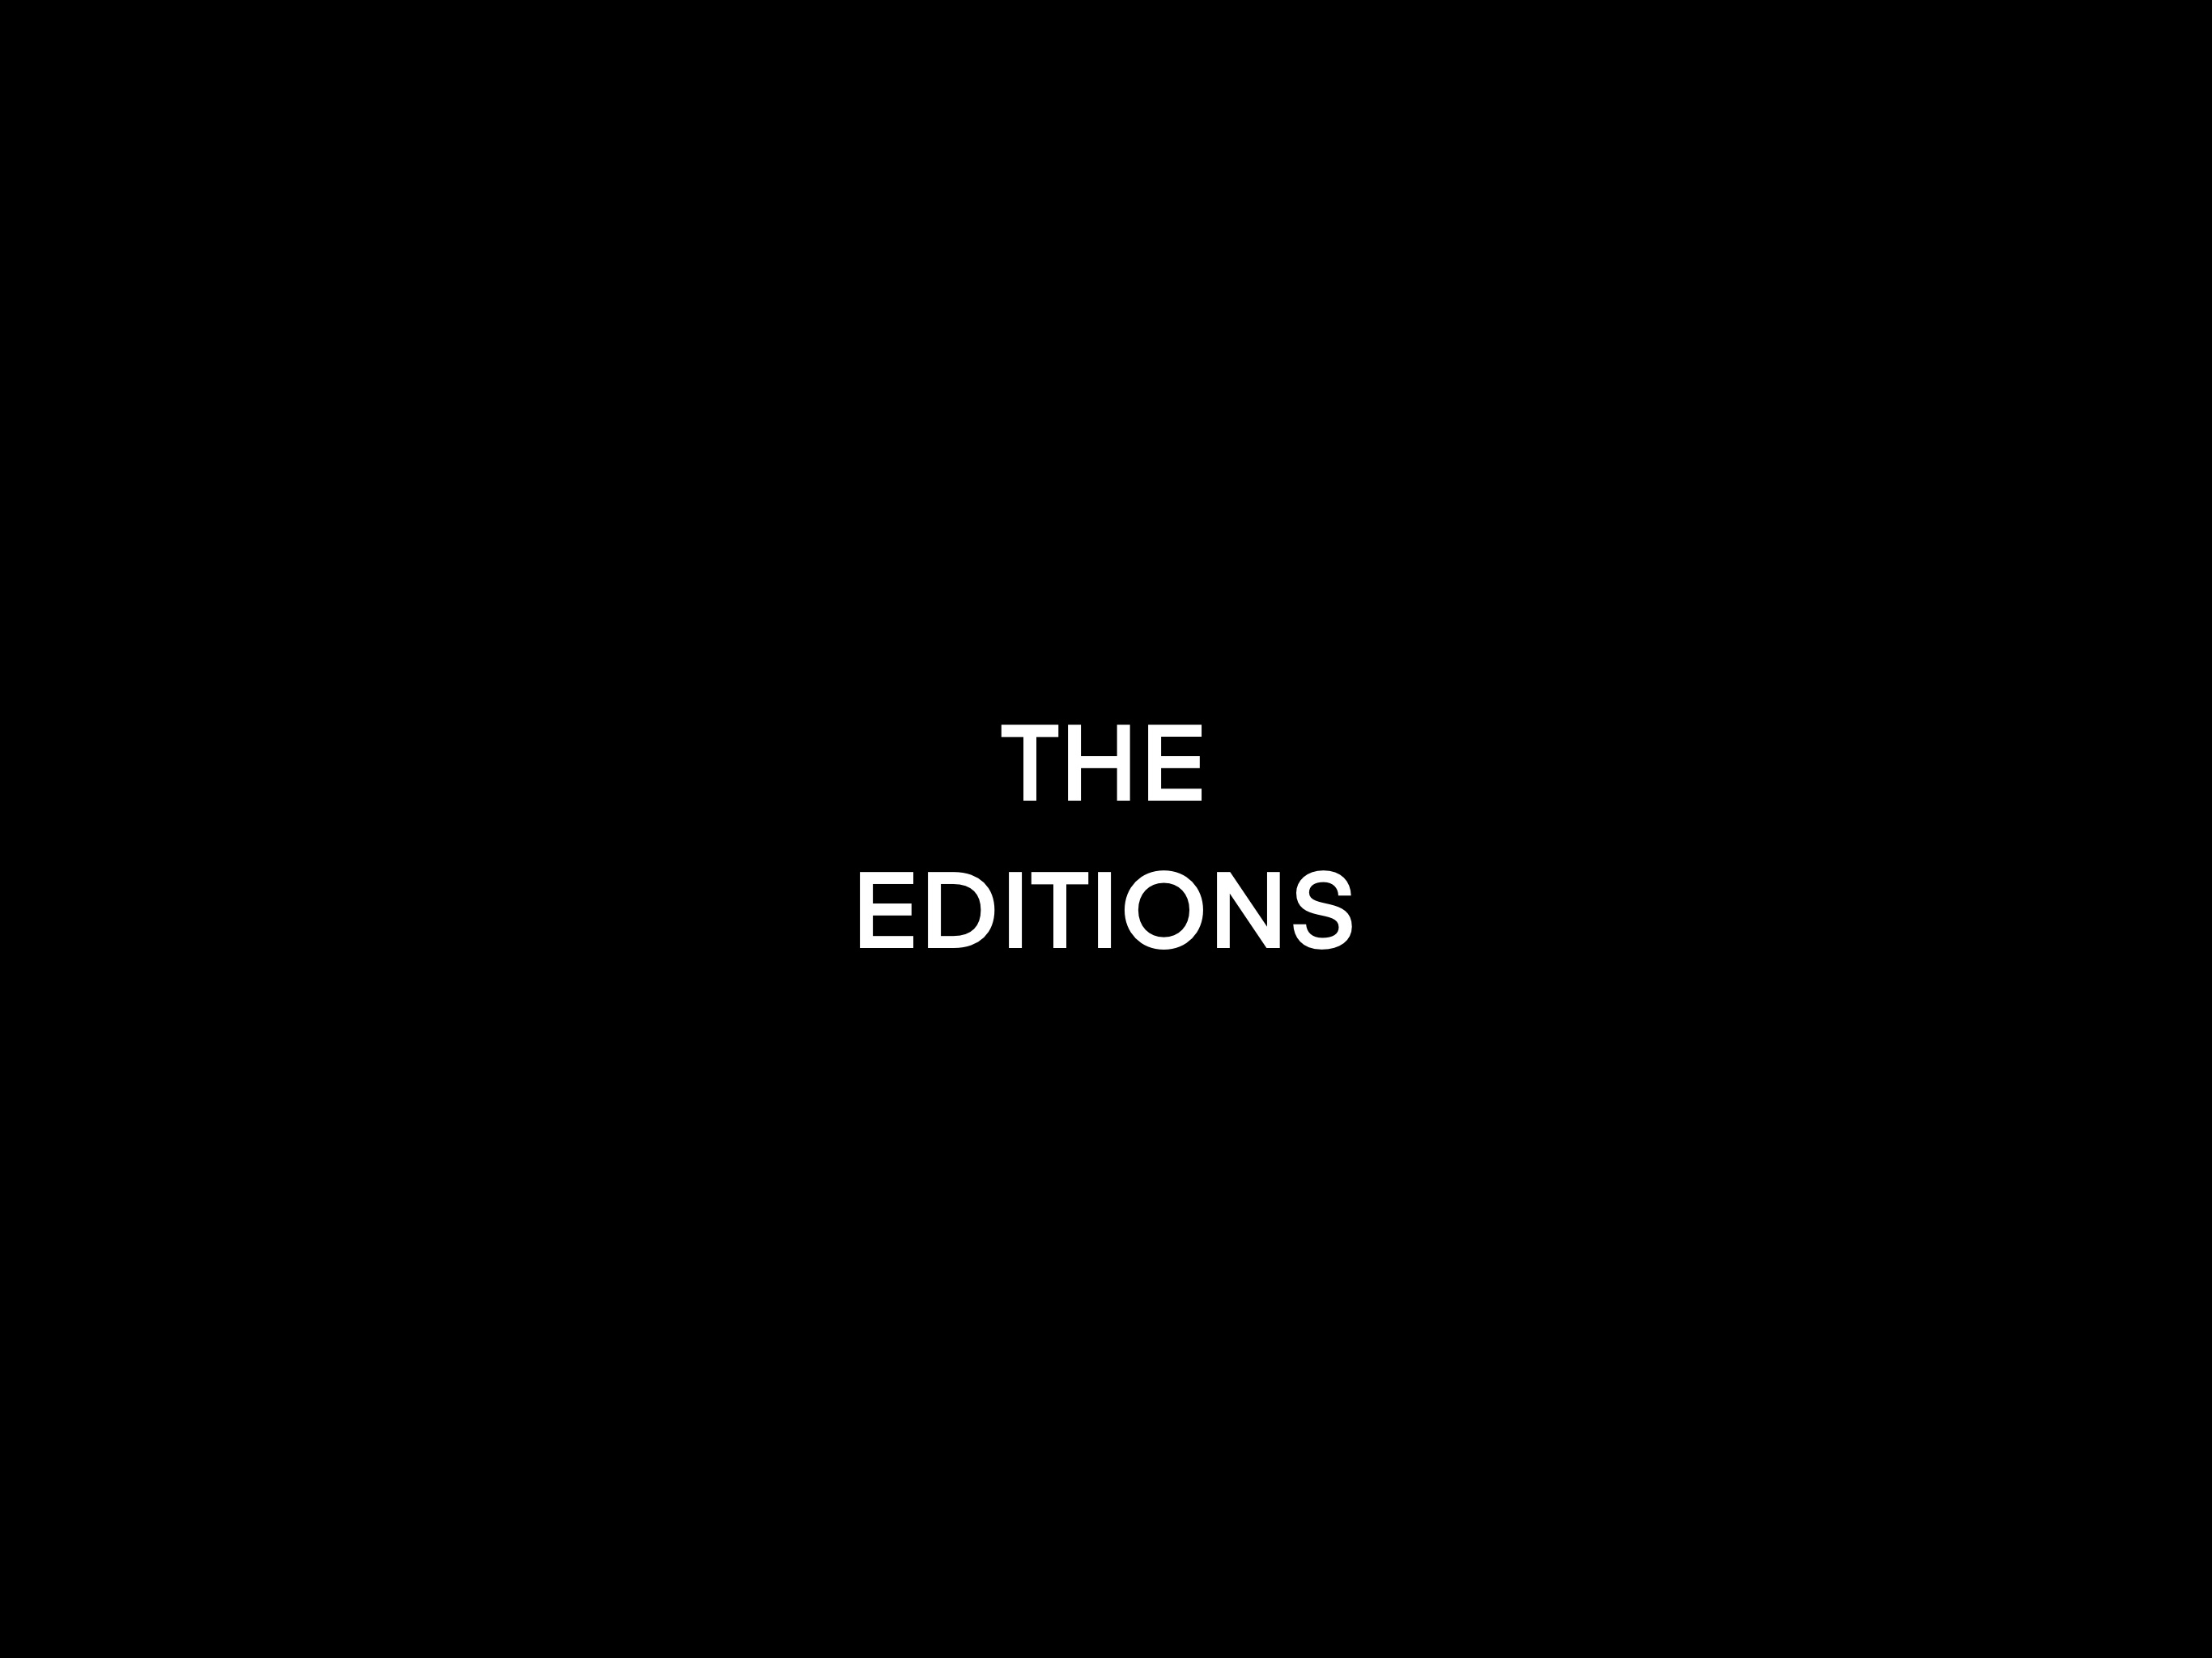 THE EDITIONS by muimooi banner